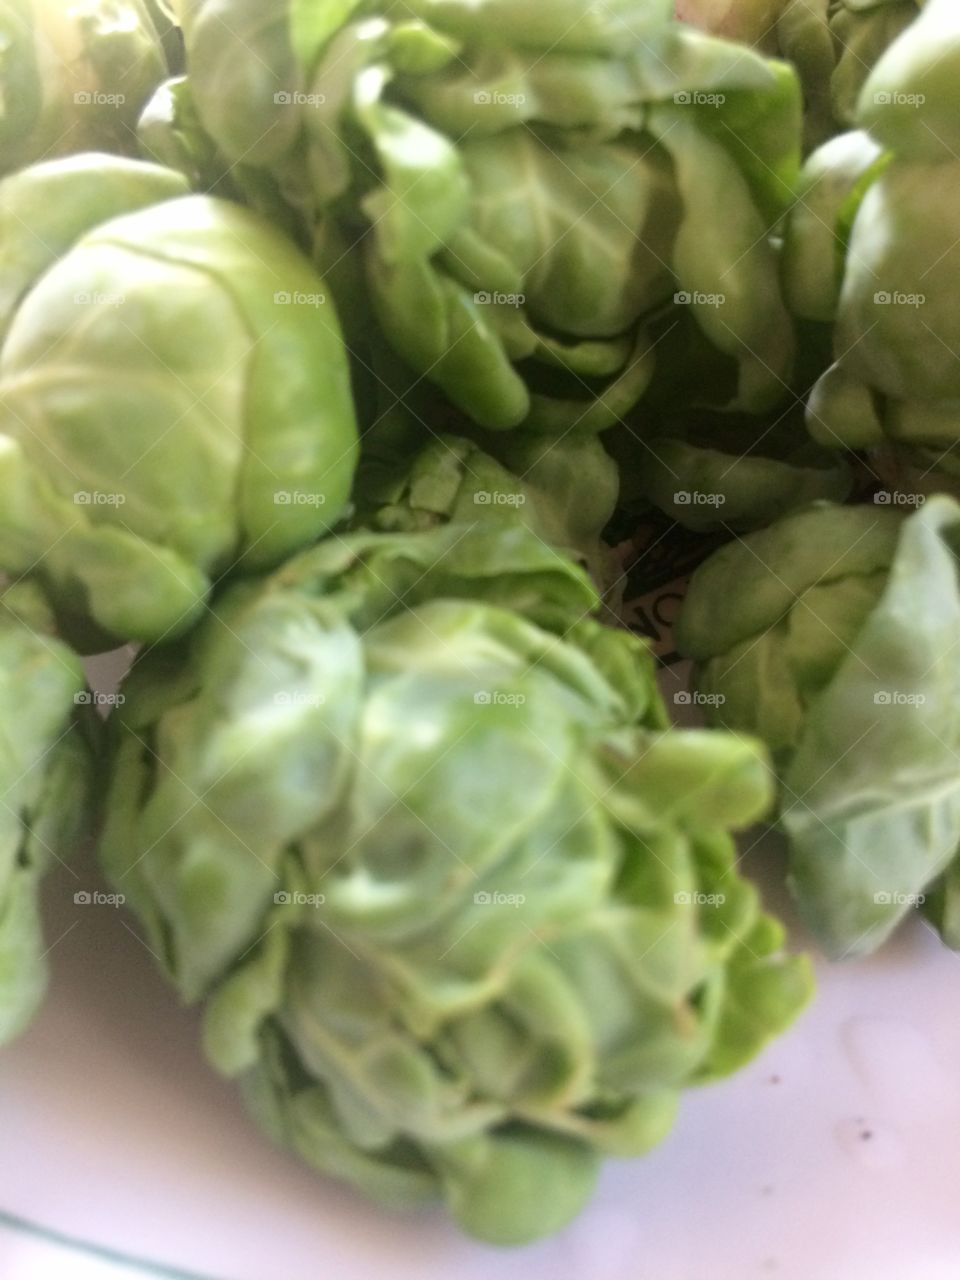 Brussel sprouts 